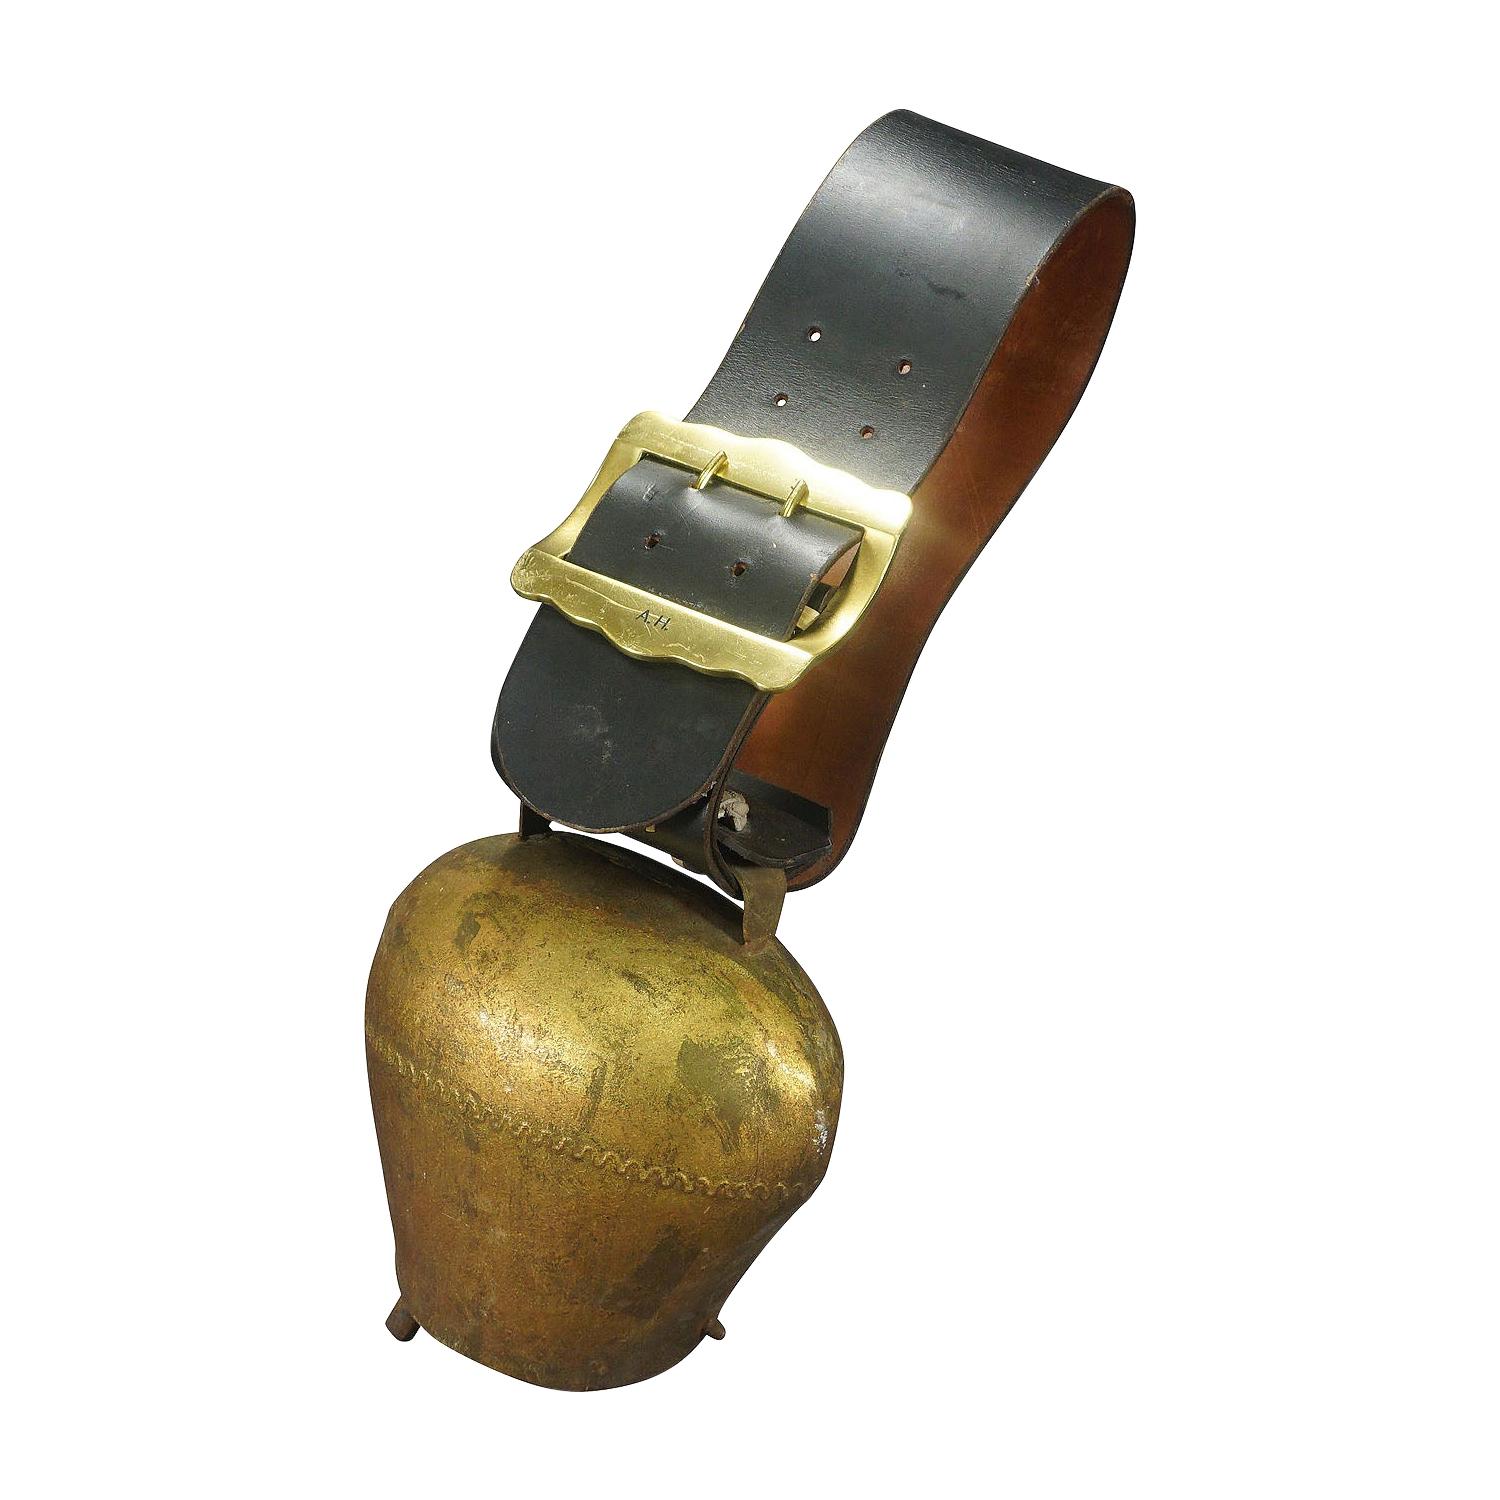 Vintage Swiss Handforged Cow Bell with Leather Strap, ca. 1920